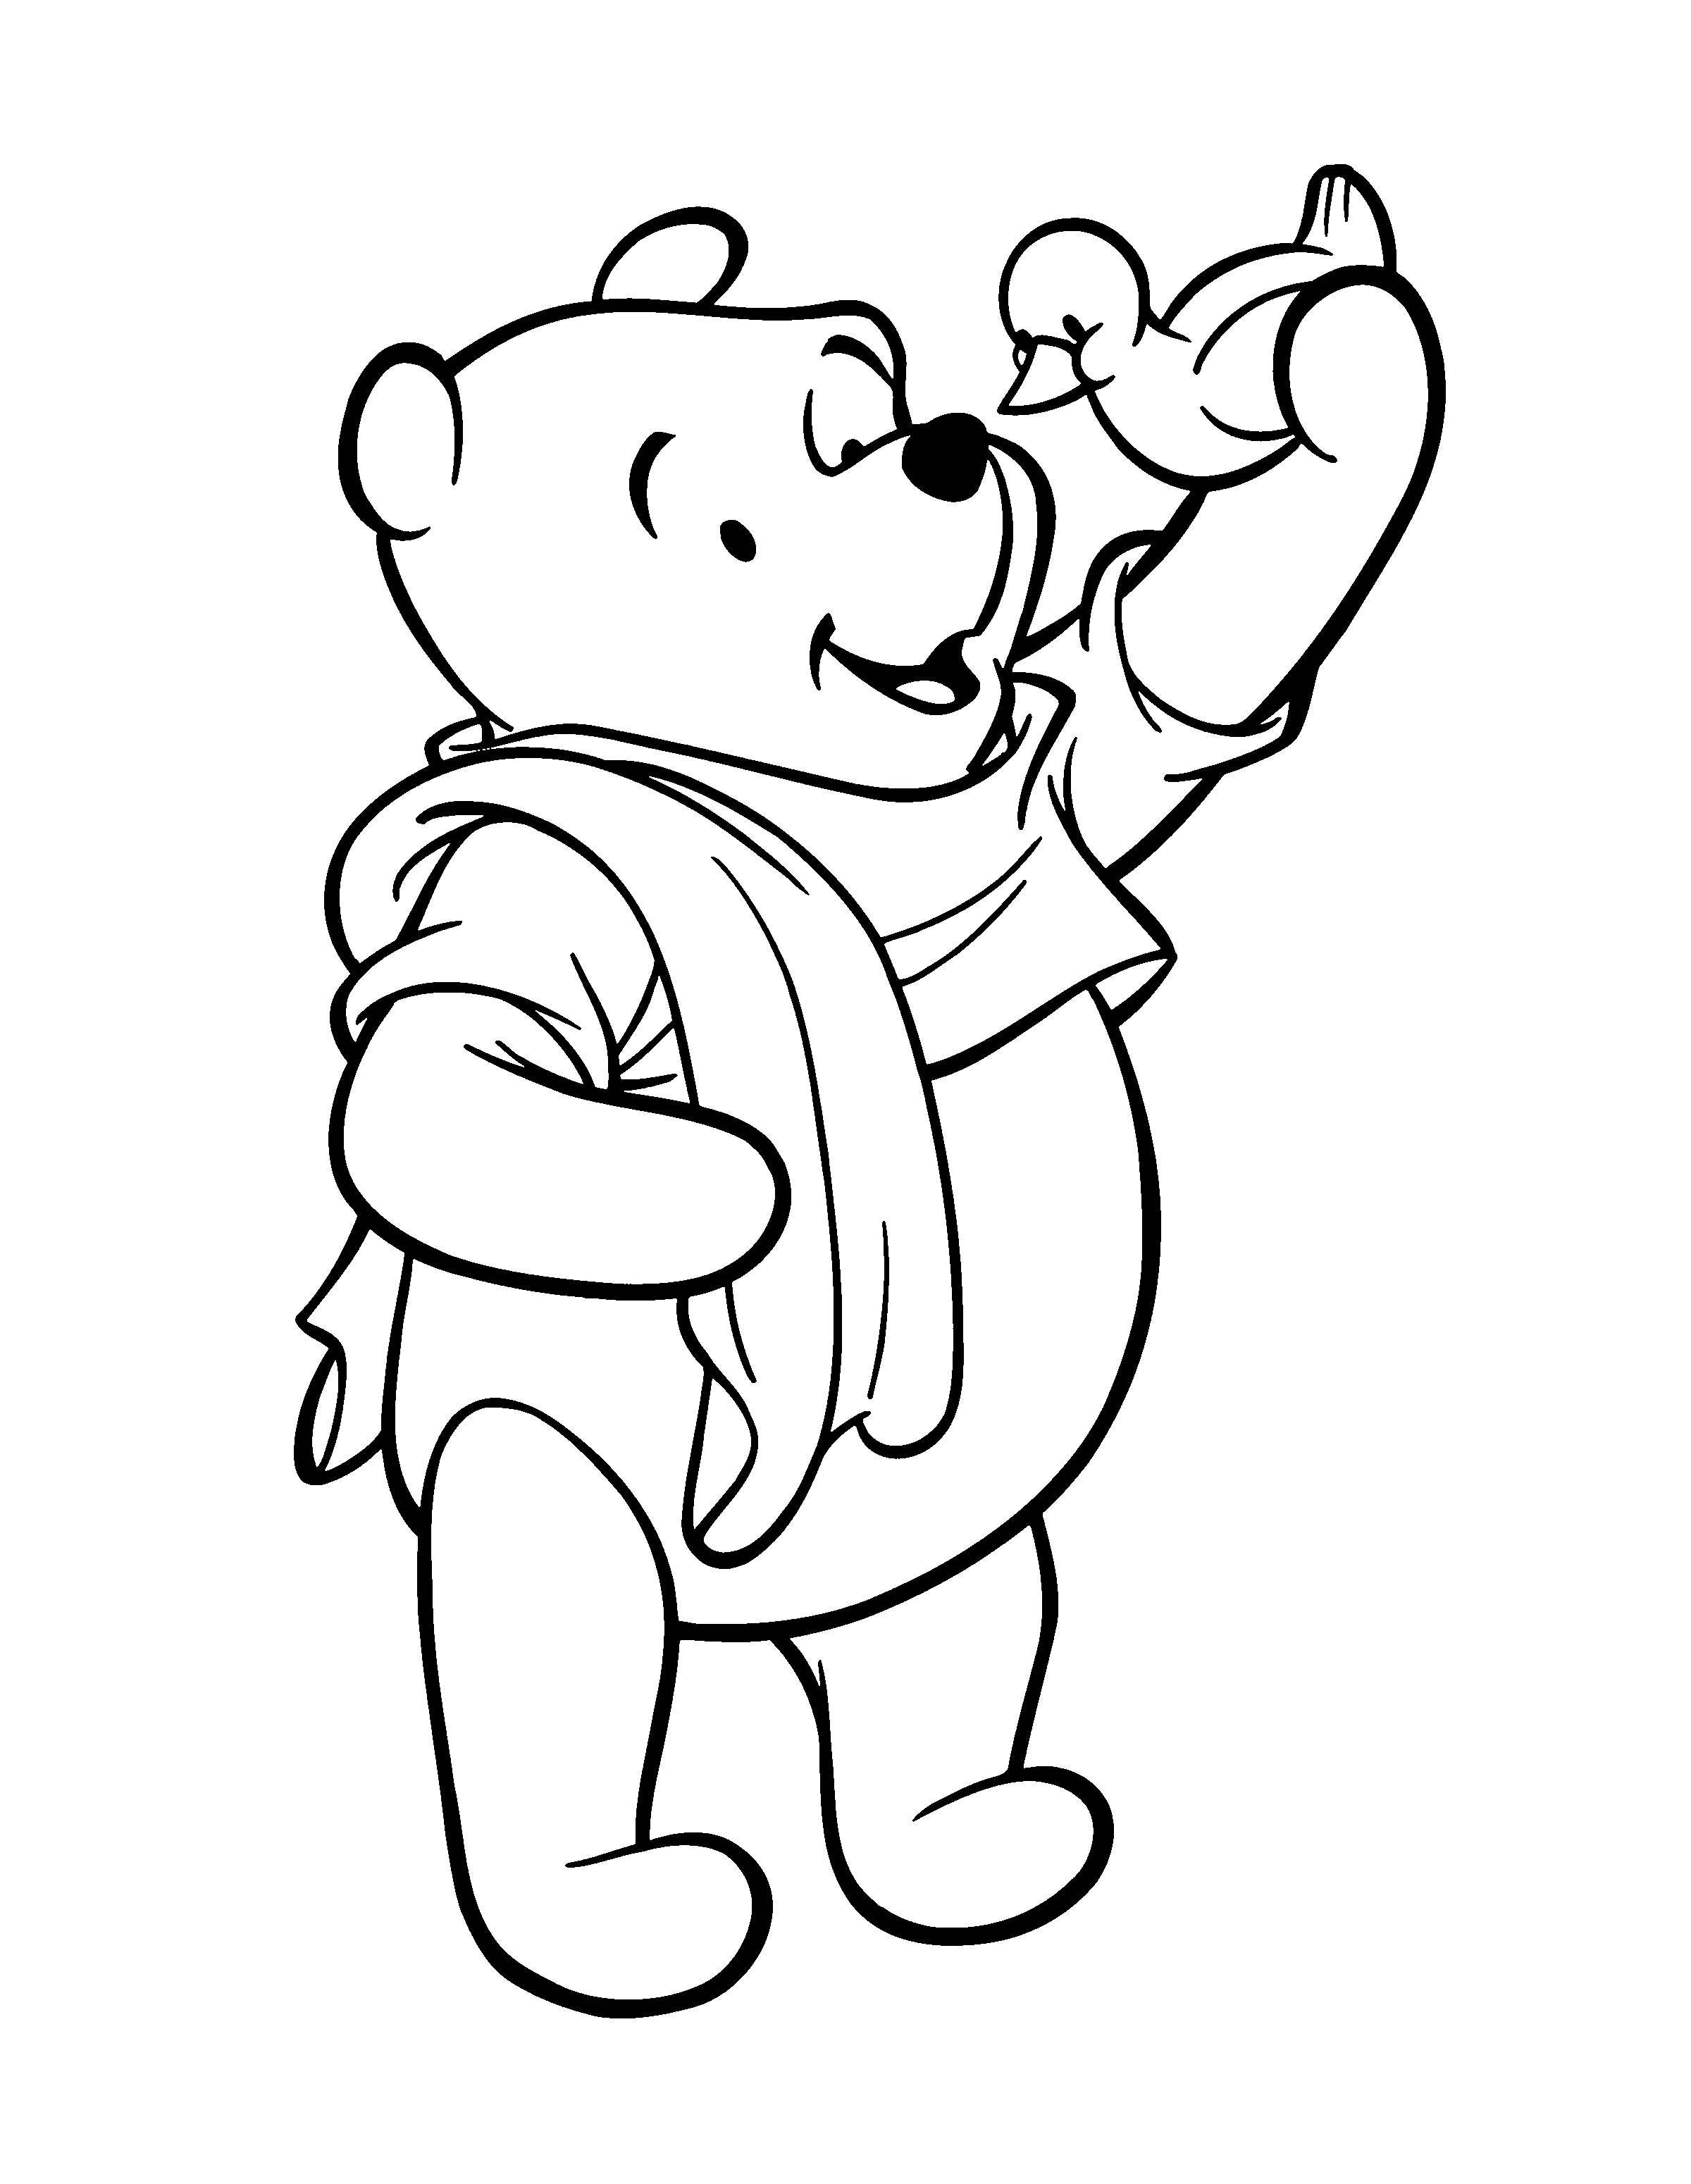 coloring-page-winnie-the-pooh-coloring-pages-99